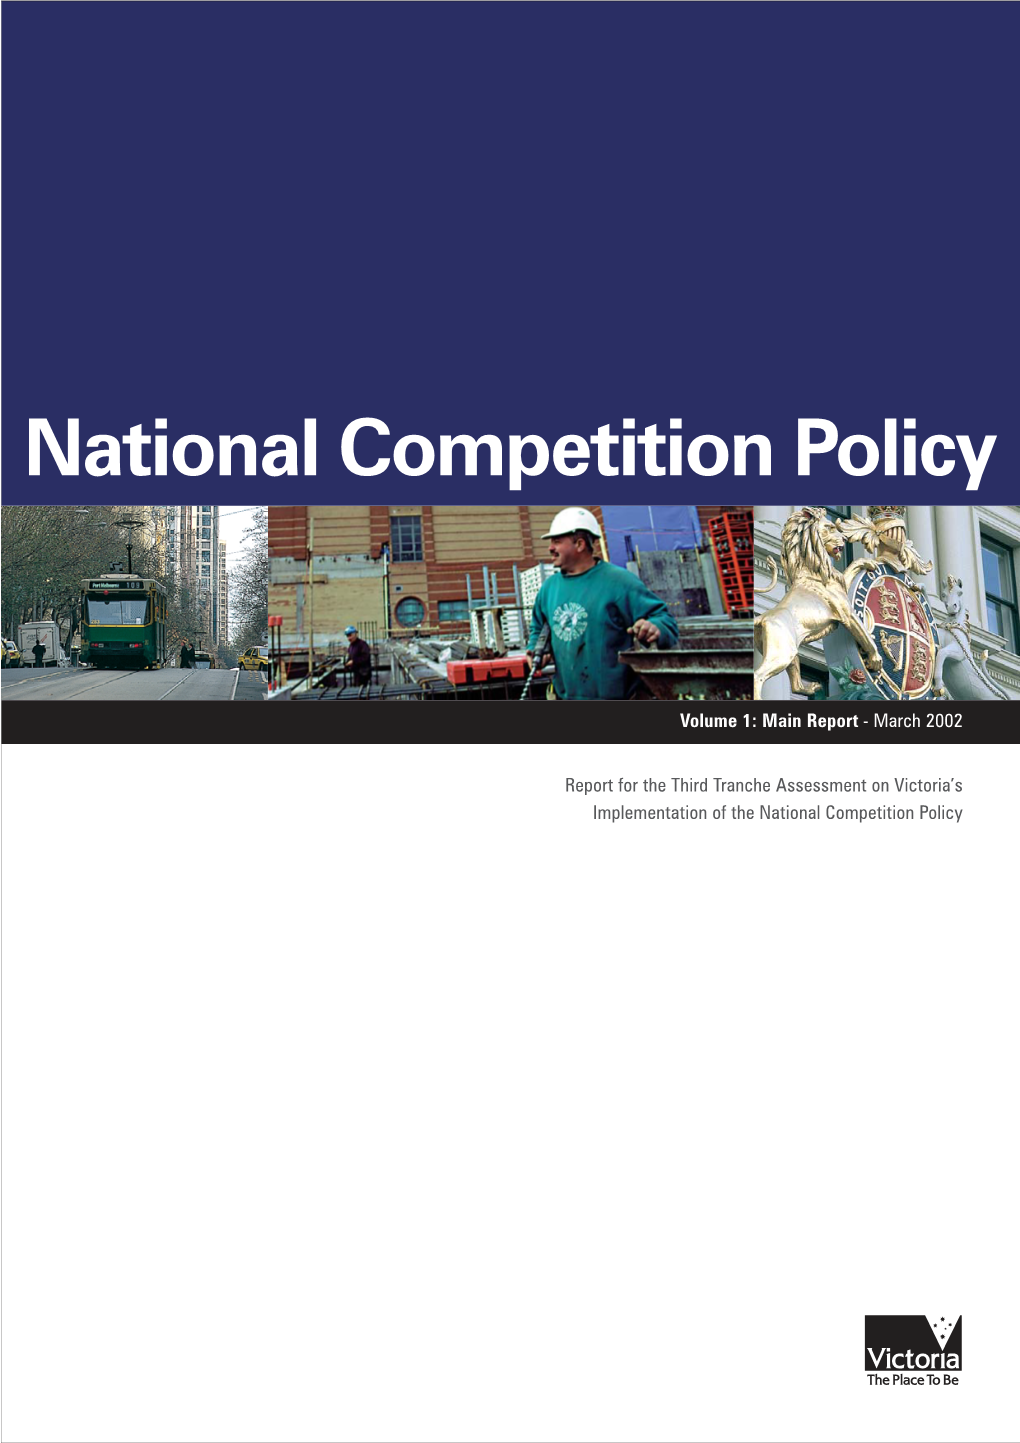 Victoria's Annual Report on the Implementation of NCP, March 2002, Volume 1